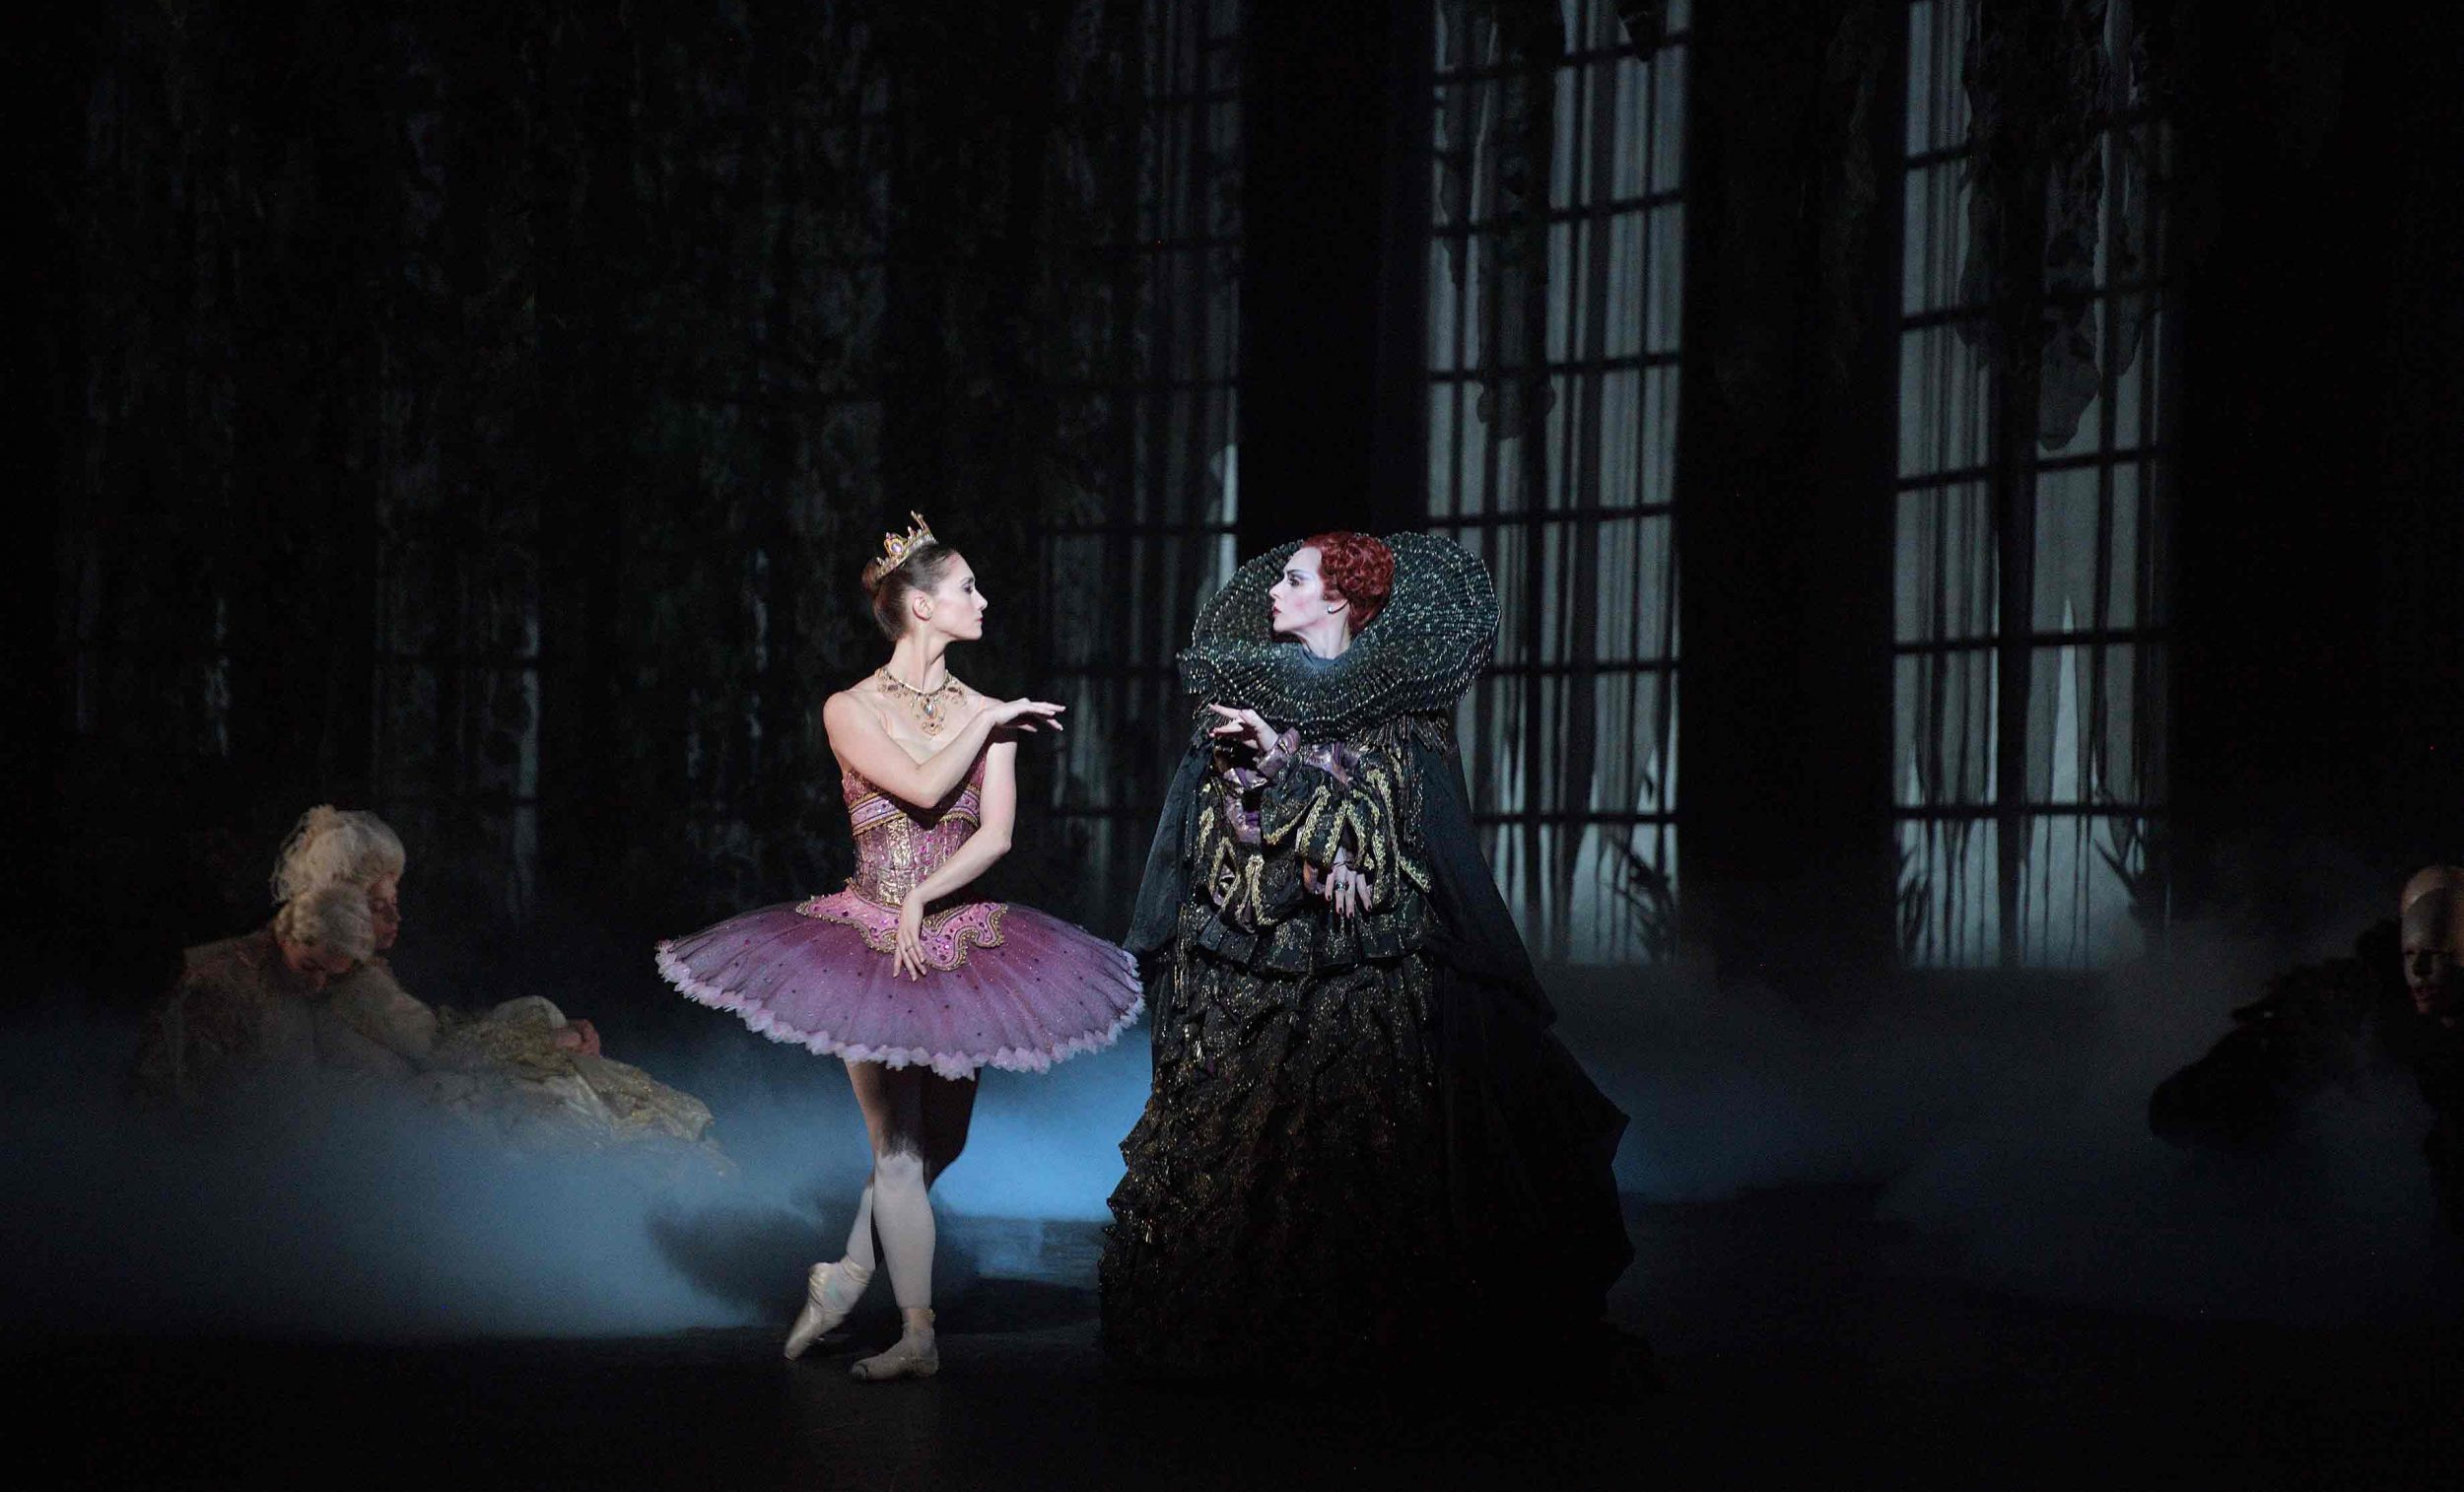 Alison-McWhinney-as-Lilac-Fairy-and-Stina-Quagebeur-as-Carabosse-in-The-Sleeping-Beauty-©-Laurent-Liotardo_WEB